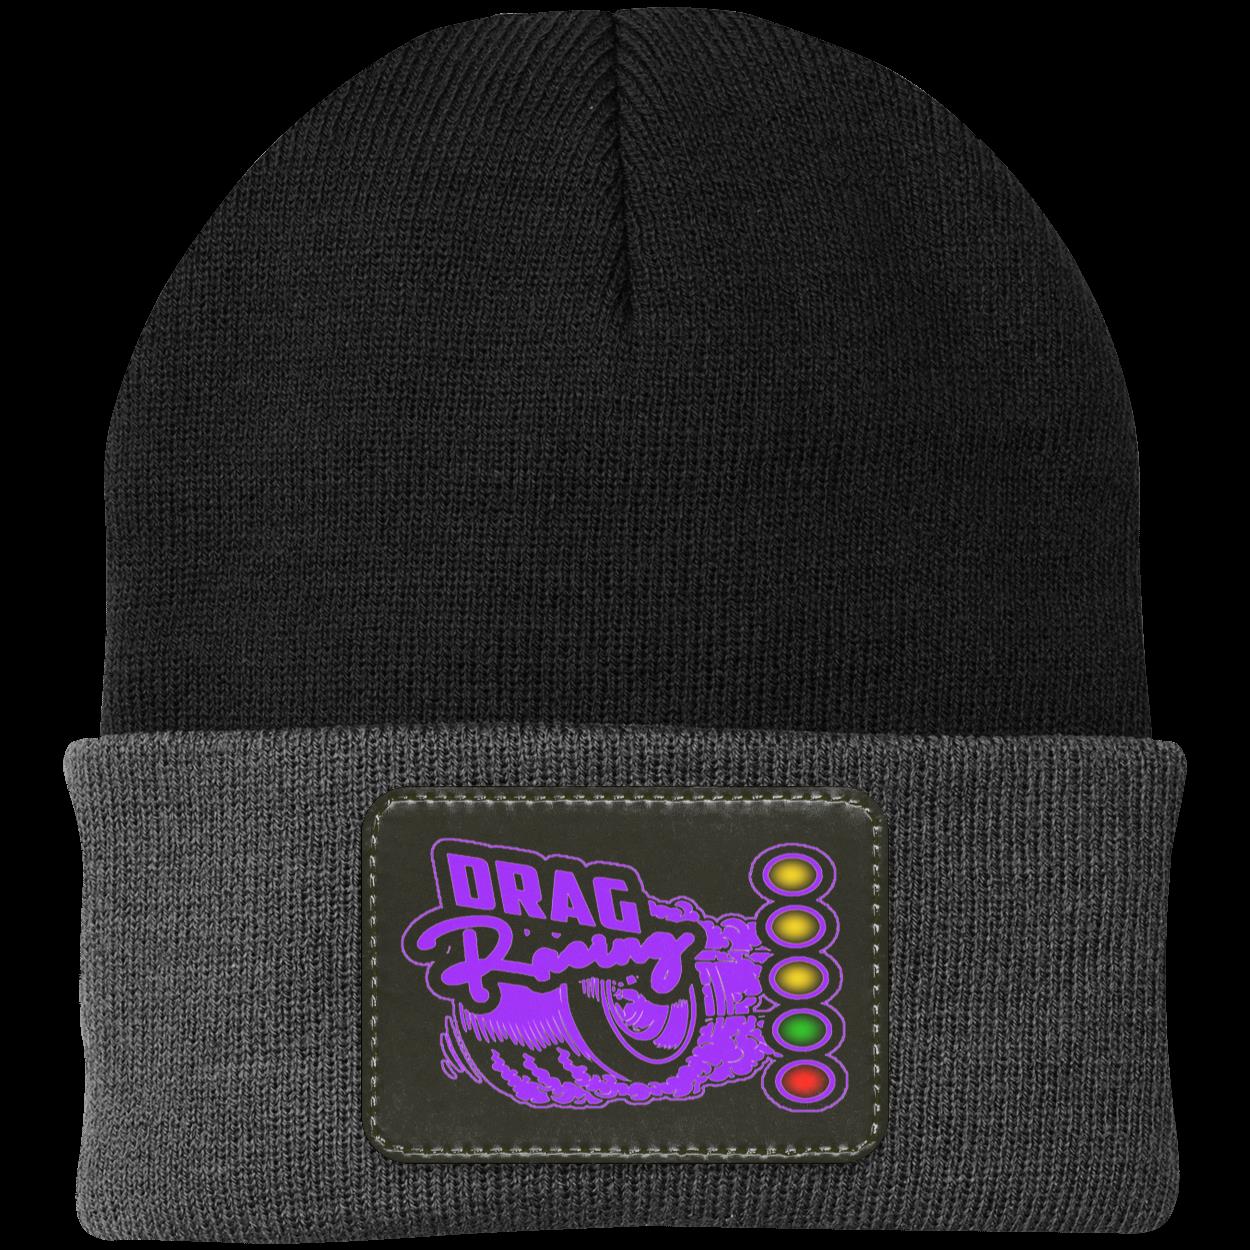 Drag Racing Patched Knit Cap V6